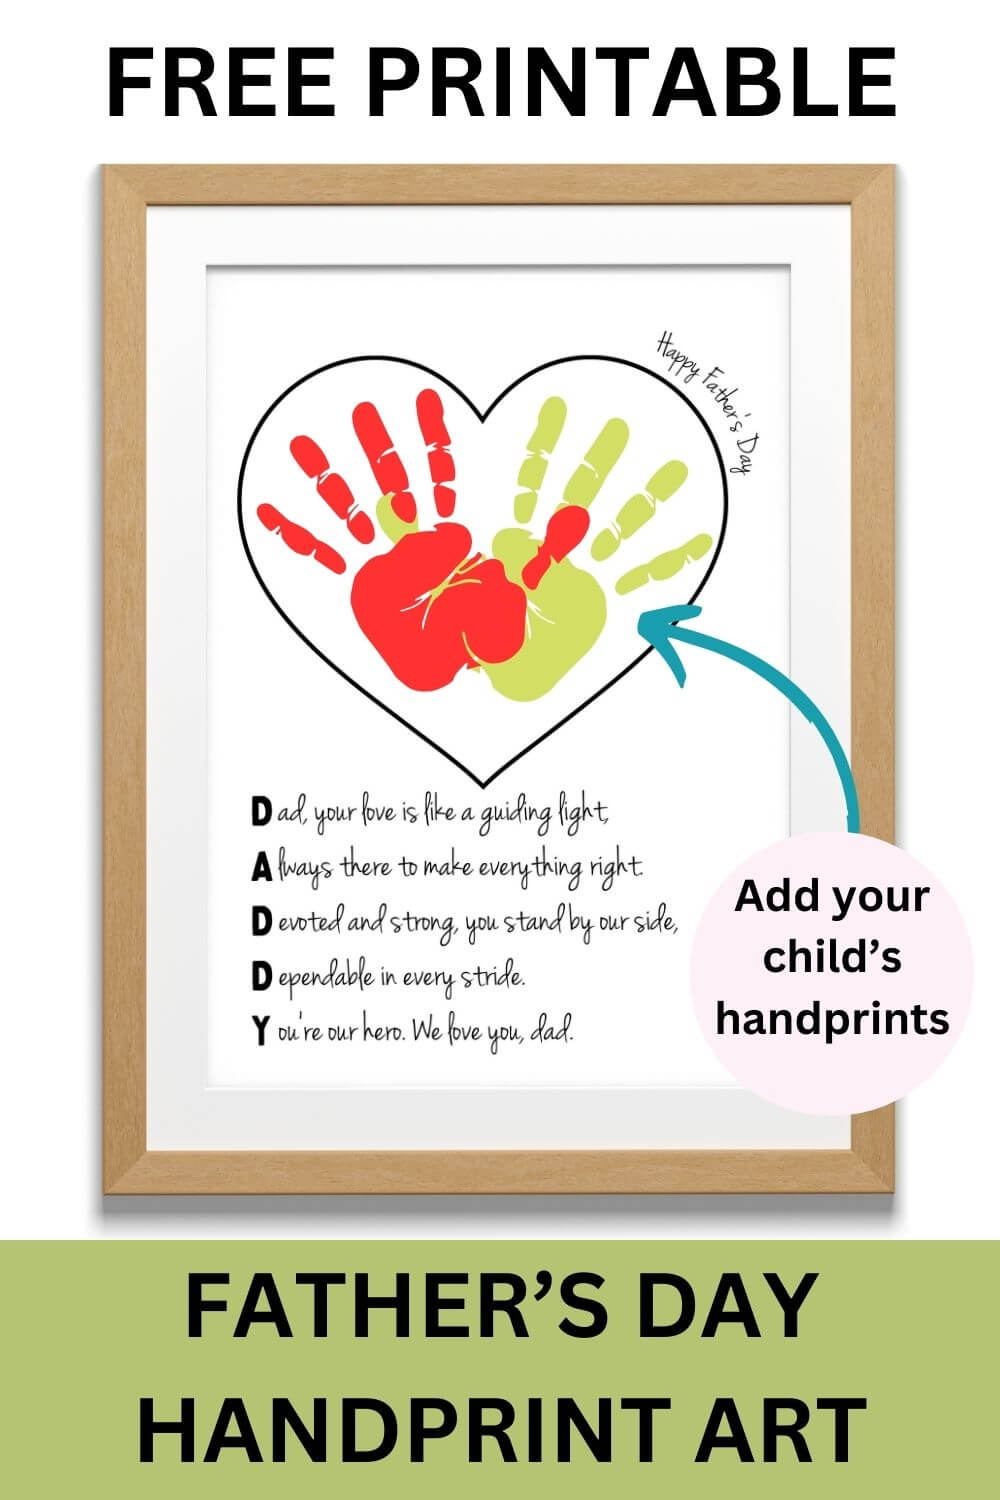 free printable father's day handprint art template in wooden frame.